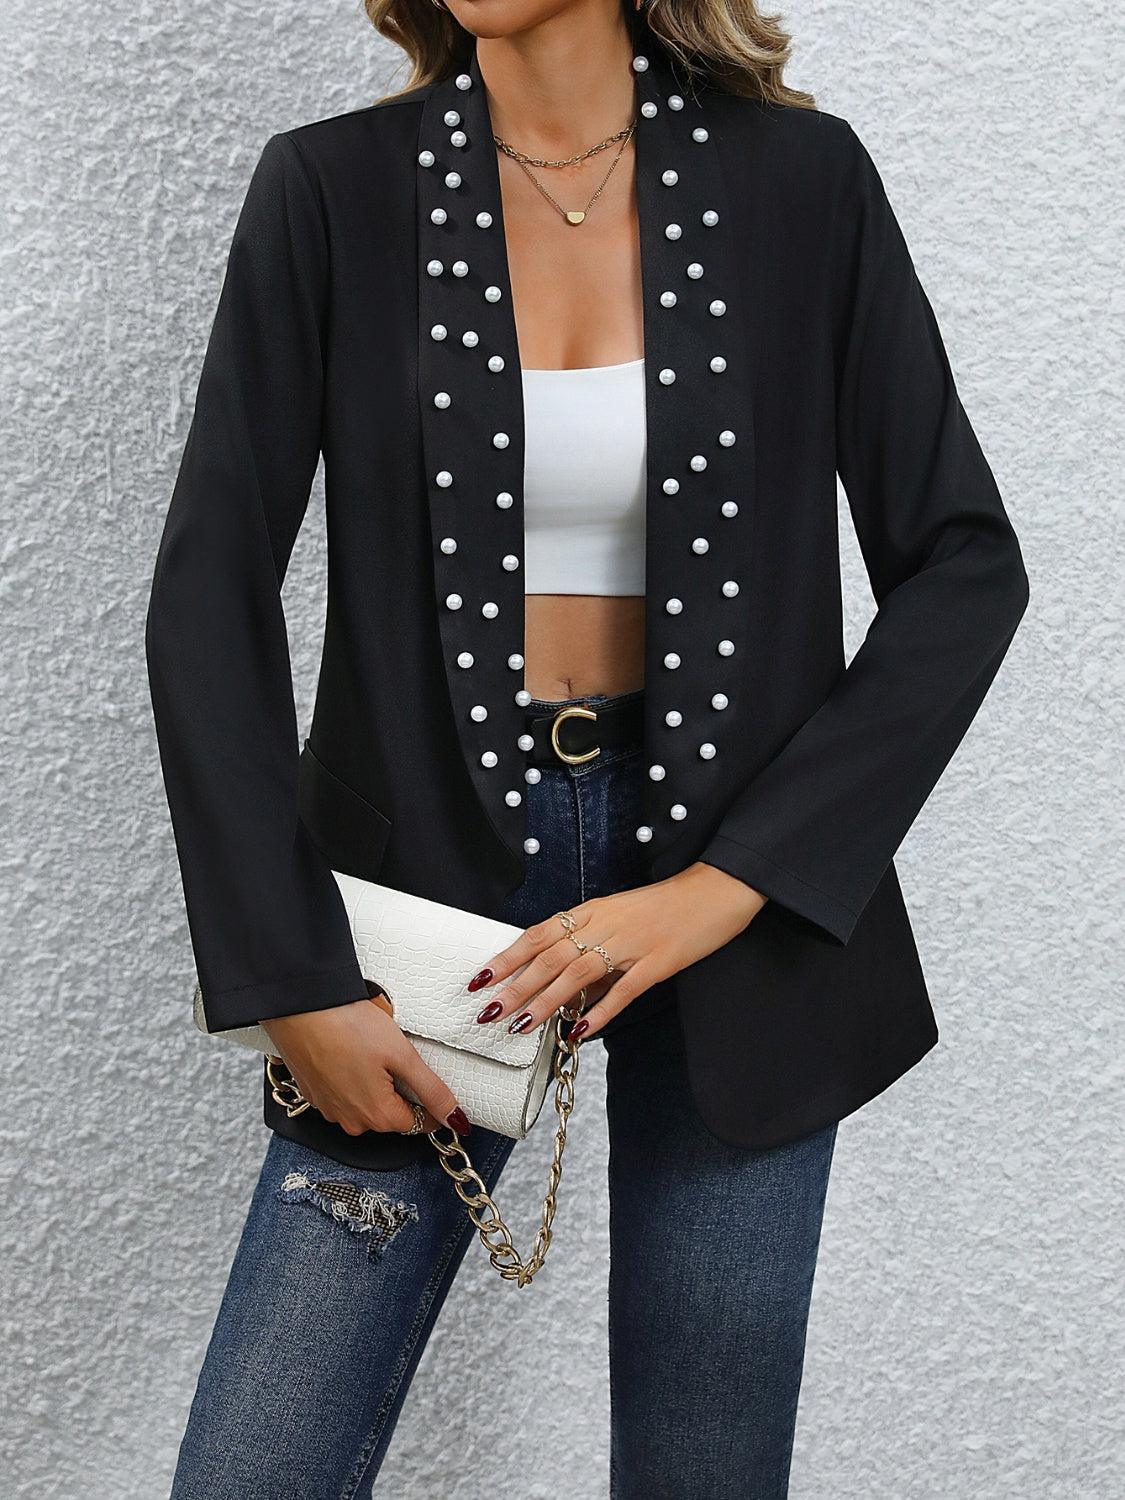 a woman wearing a black jacket and white top